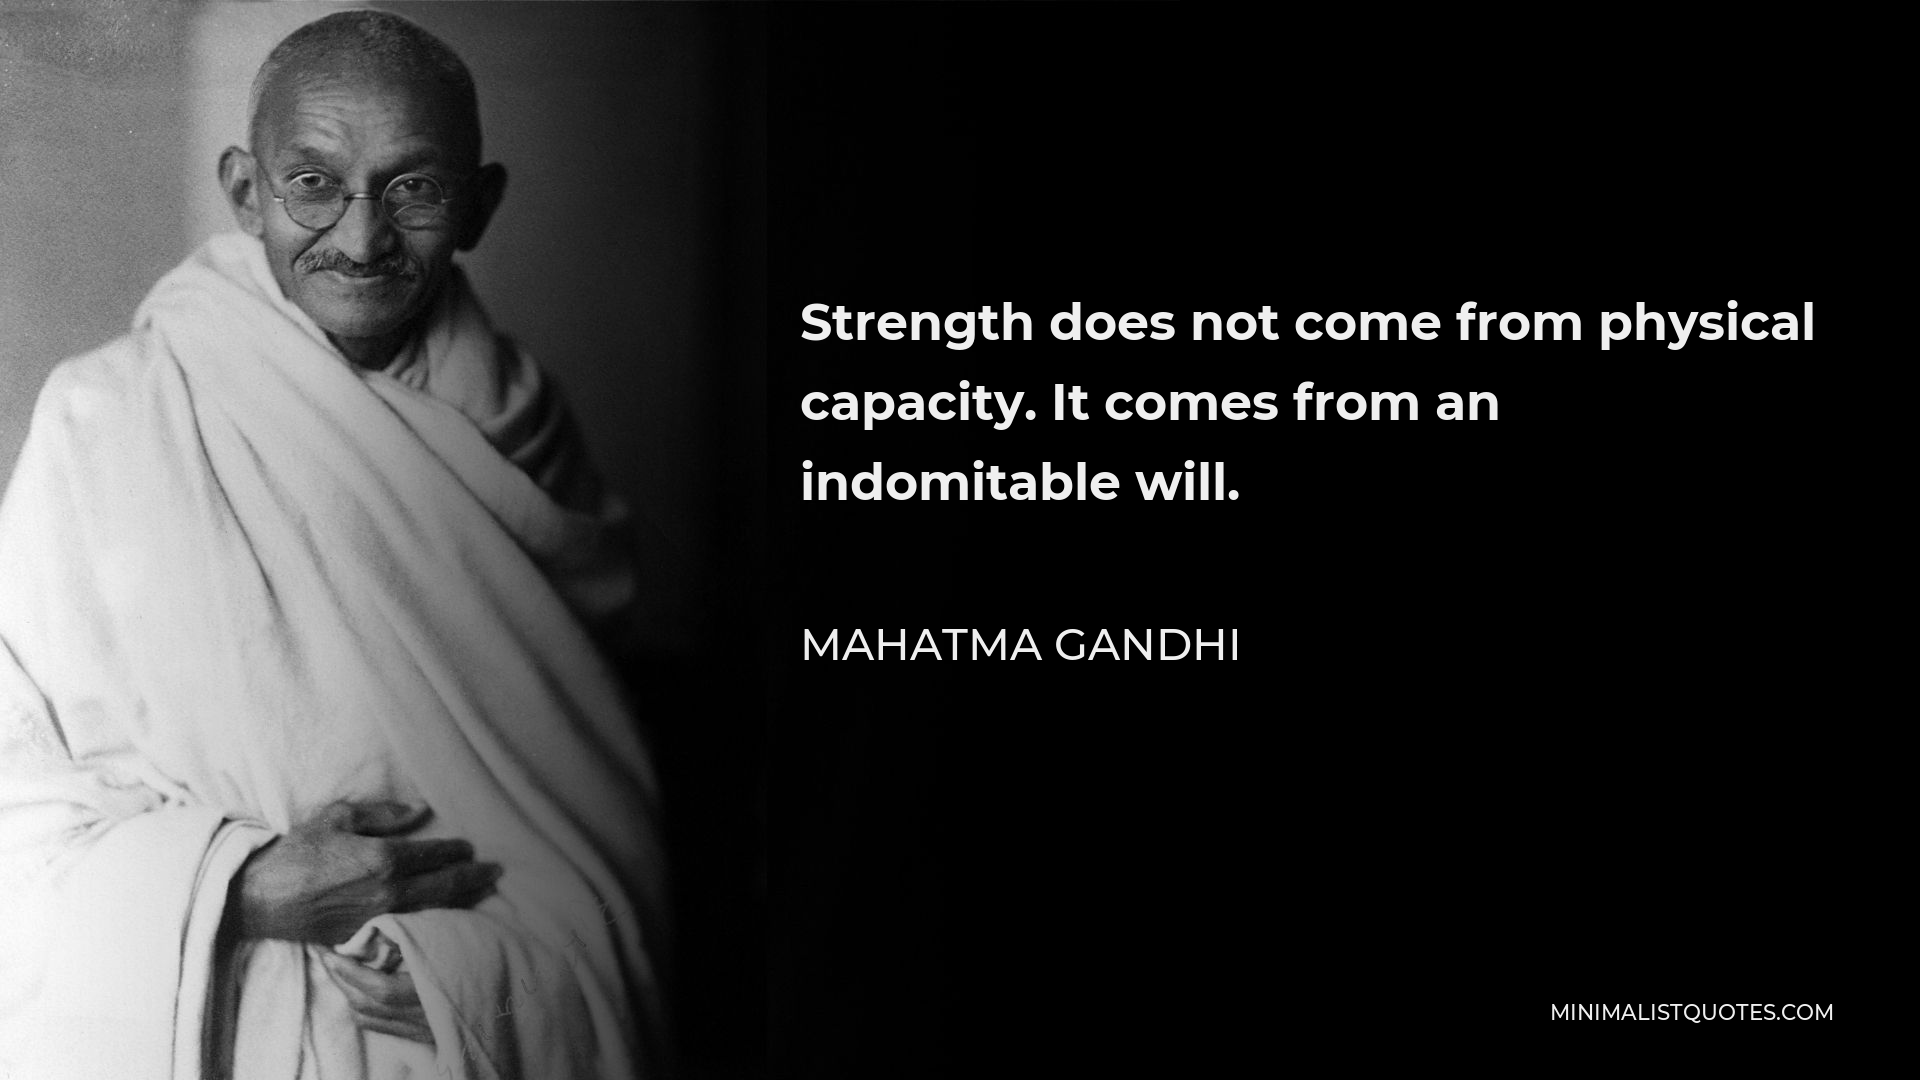 Mahatma Gandhi Quote - Strength does not come from physical capacity. It comes from an indomitable will.